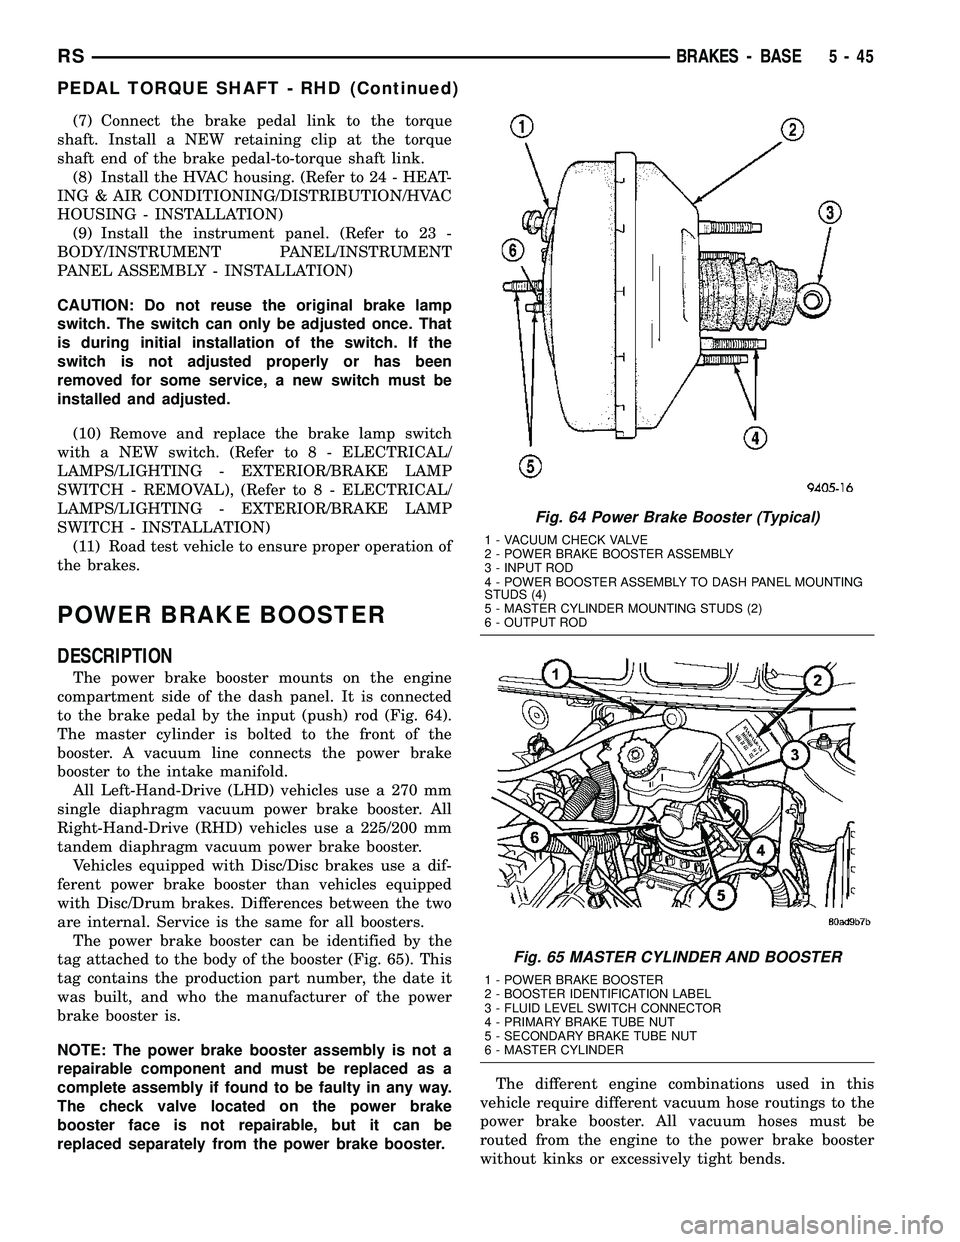 CHRYSLER VOYAGER 2005  Service Manual (7) Connect the brake pedal link to the torque
shaft. Install a NEW retaining clip at the torque
shaft end of the brake pedal-to-torque shaft link.
(8) Install the HVAC housing. (Refer to 24 - HEAT-
I